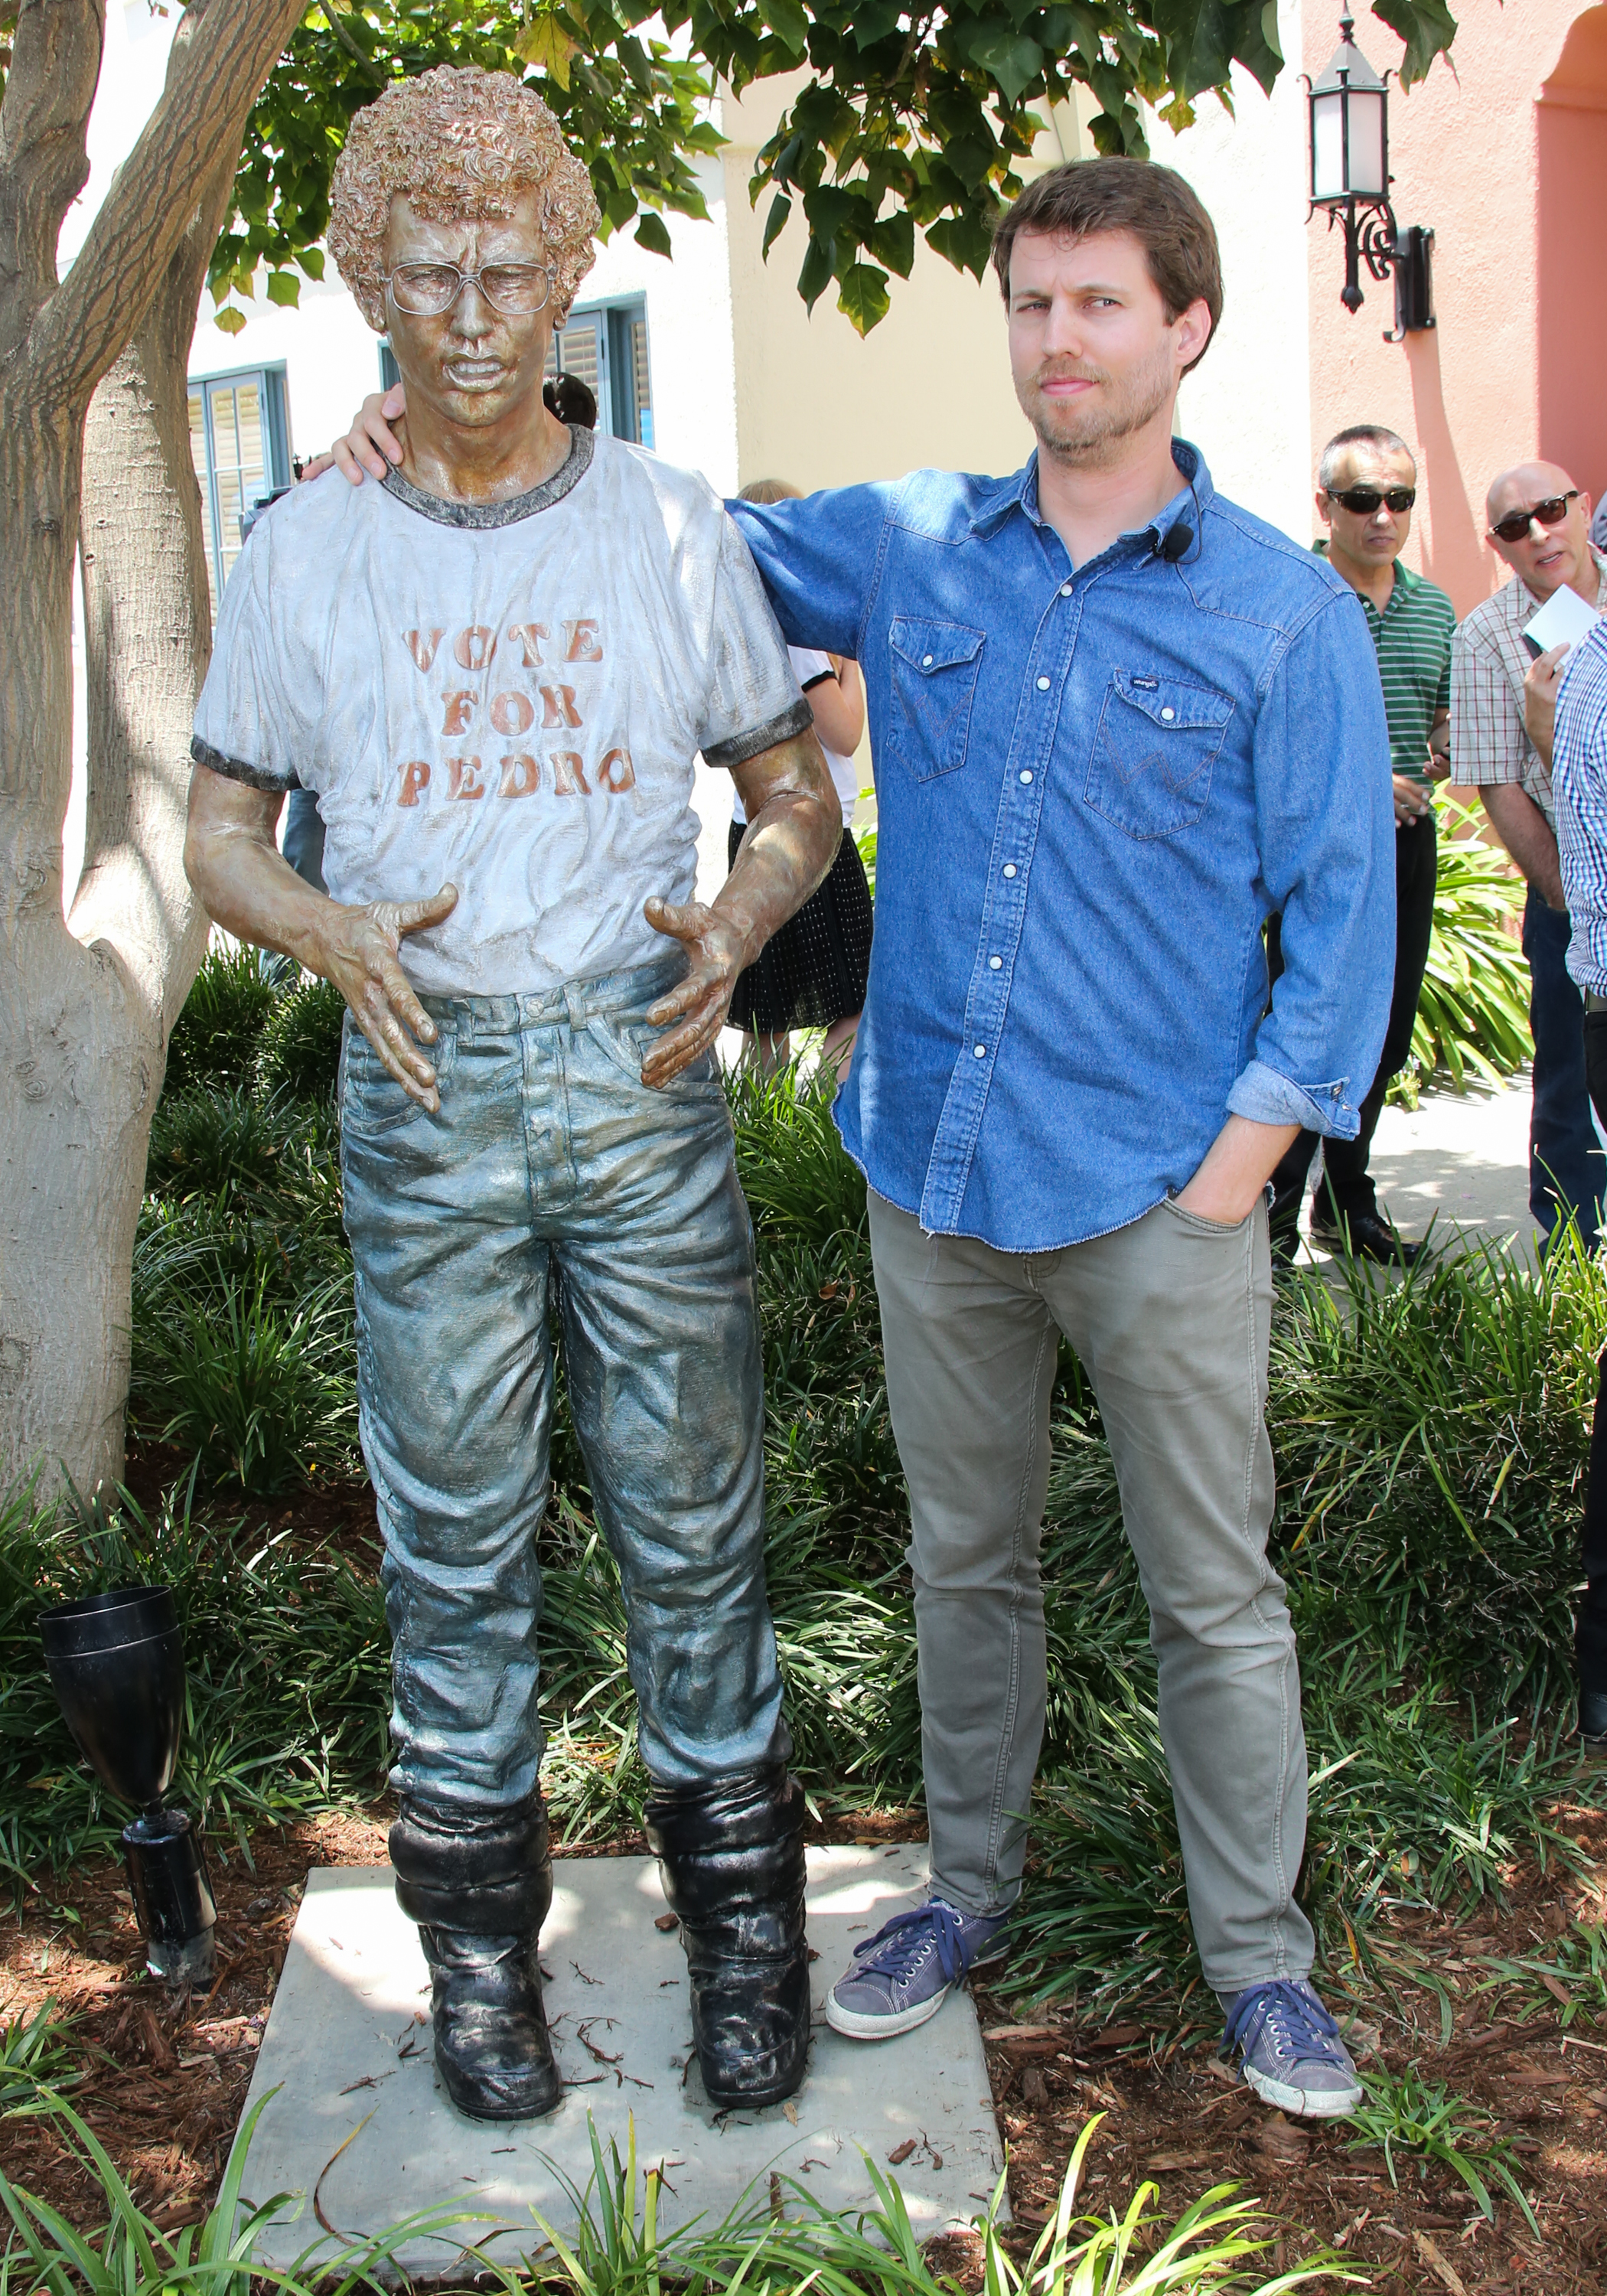 CENTURY CITY, CA - JUNE 09: Actor Jon Heder attends "Napoleon Dynamite" 10 sweet years Blu-Ray/DVD release and statue dedication at The Fox Studio Lot on June 9, 2014 in Century City, California. (Photo by Paul Archuleta/FilmMagic)